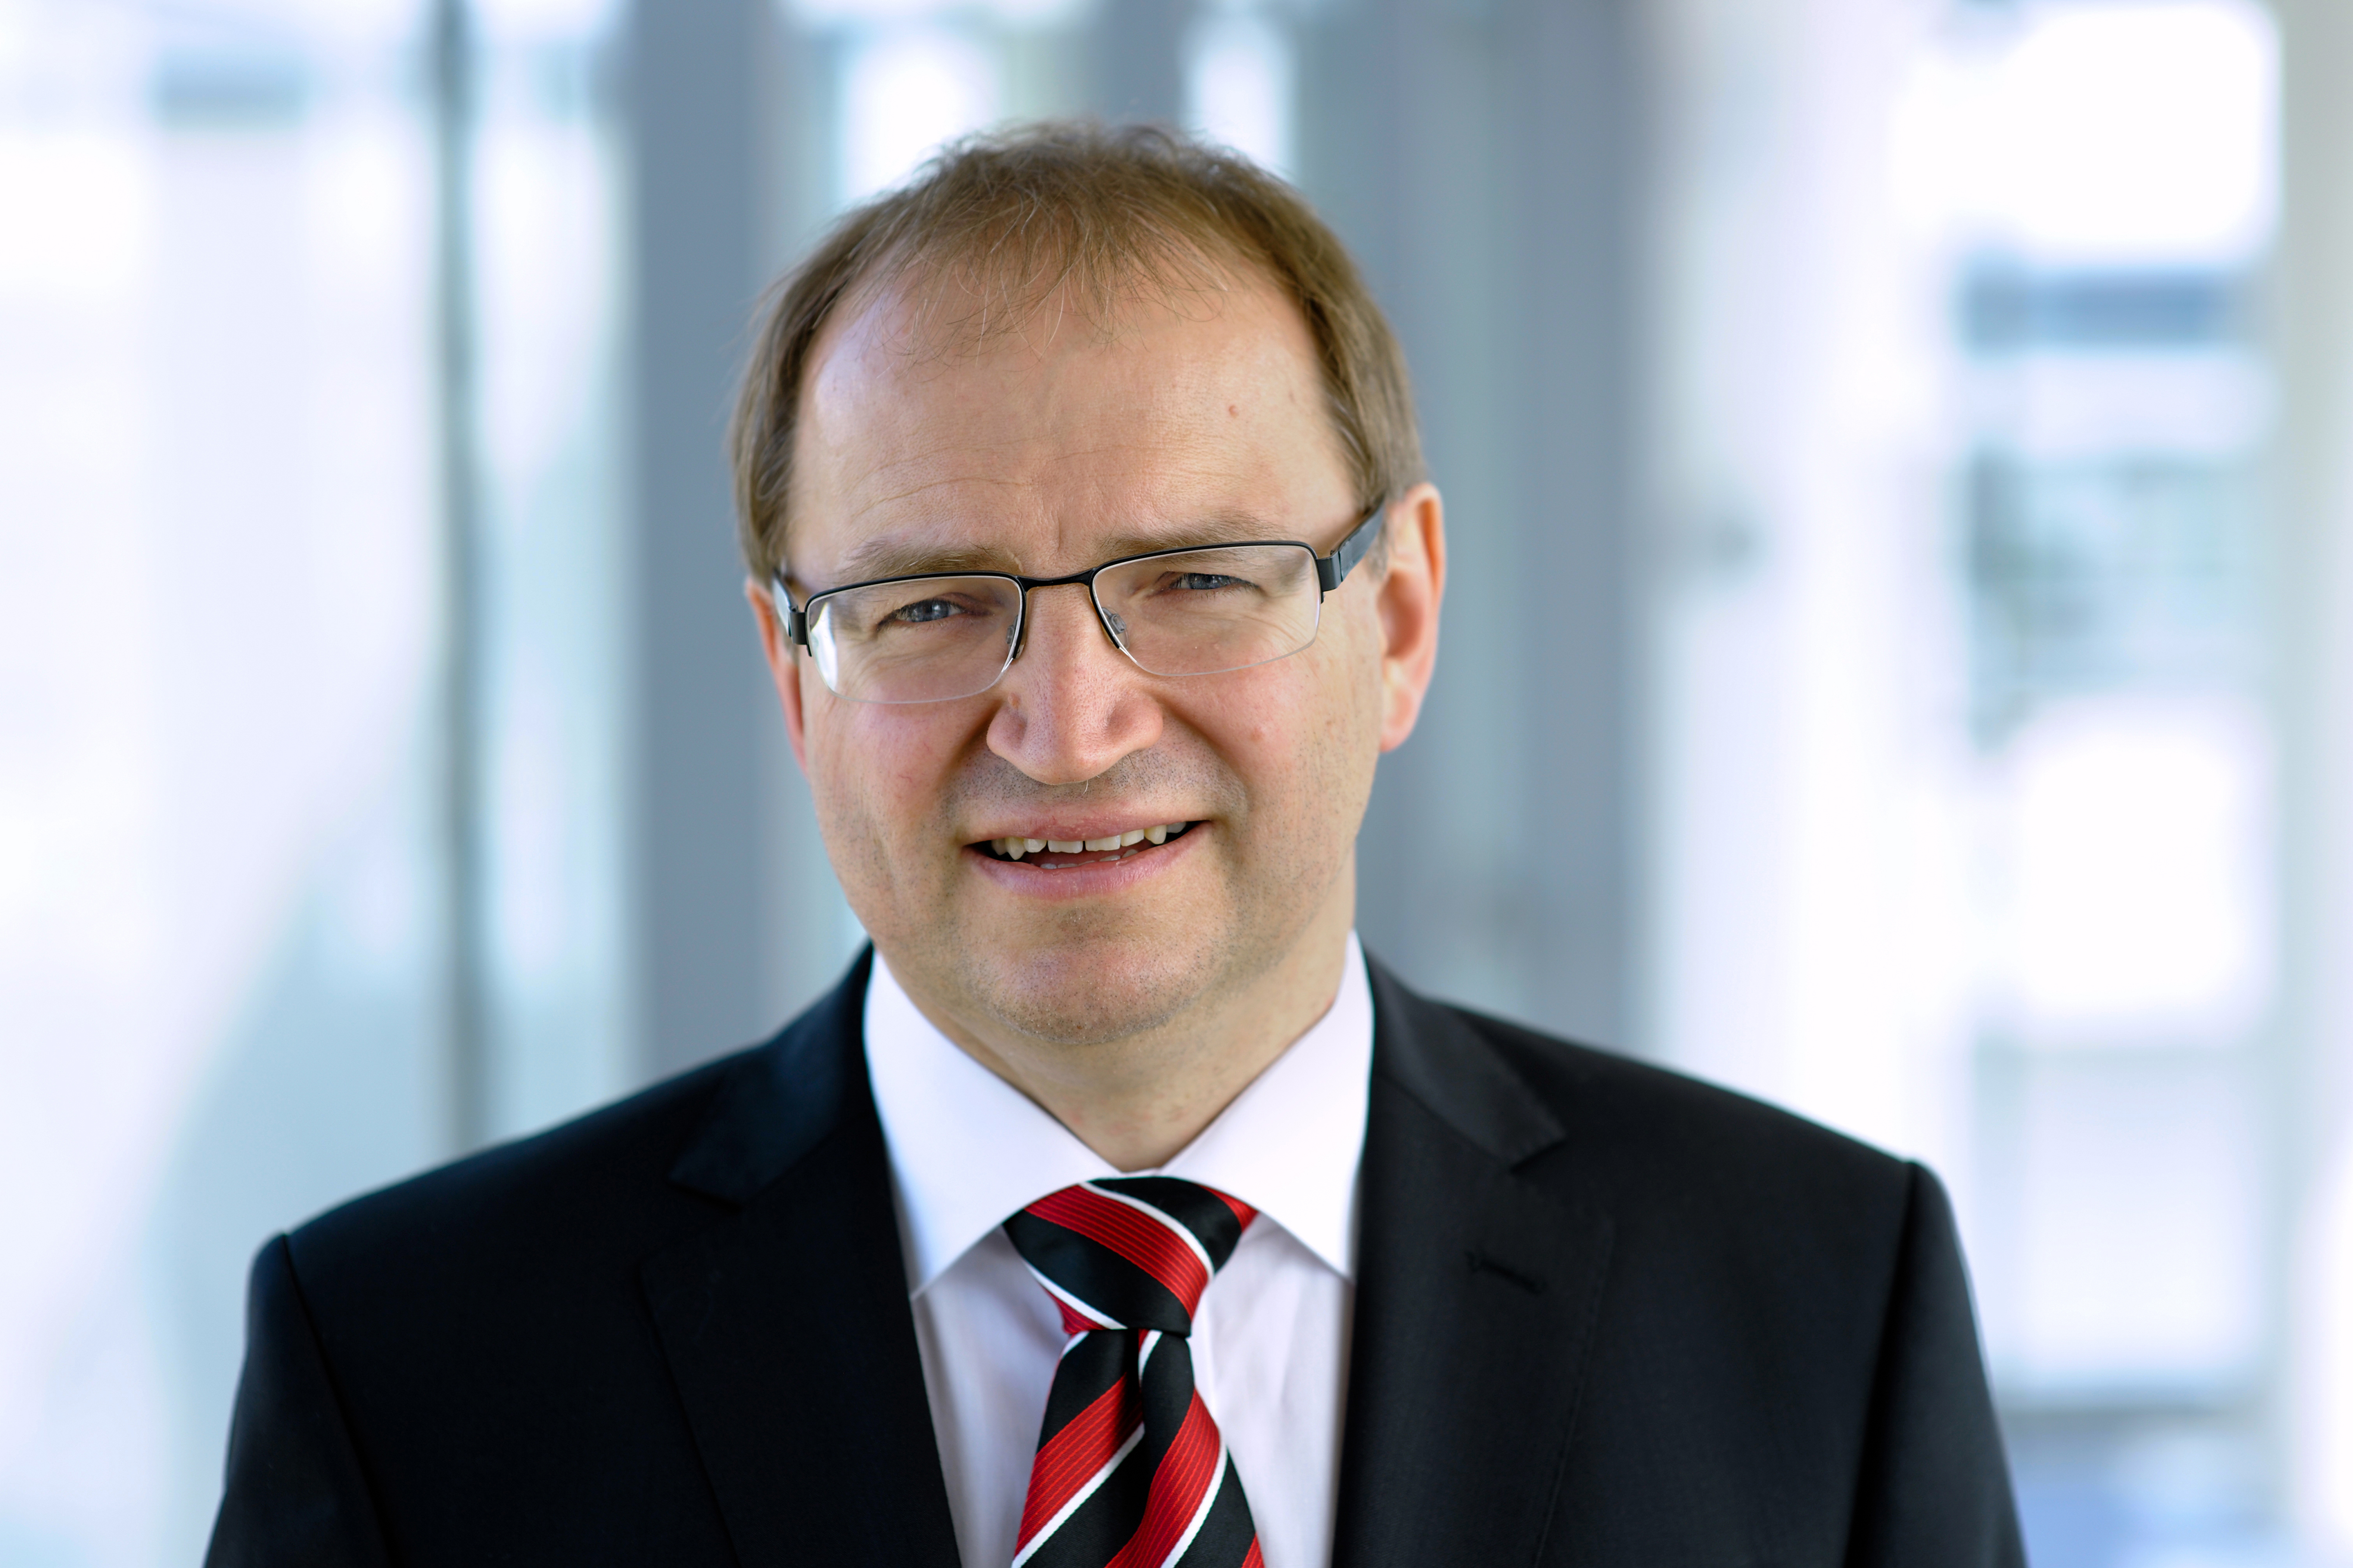 Dr. Bernhard Grill, director of Fraunhofer IIS with focus on Audio & Multimedia